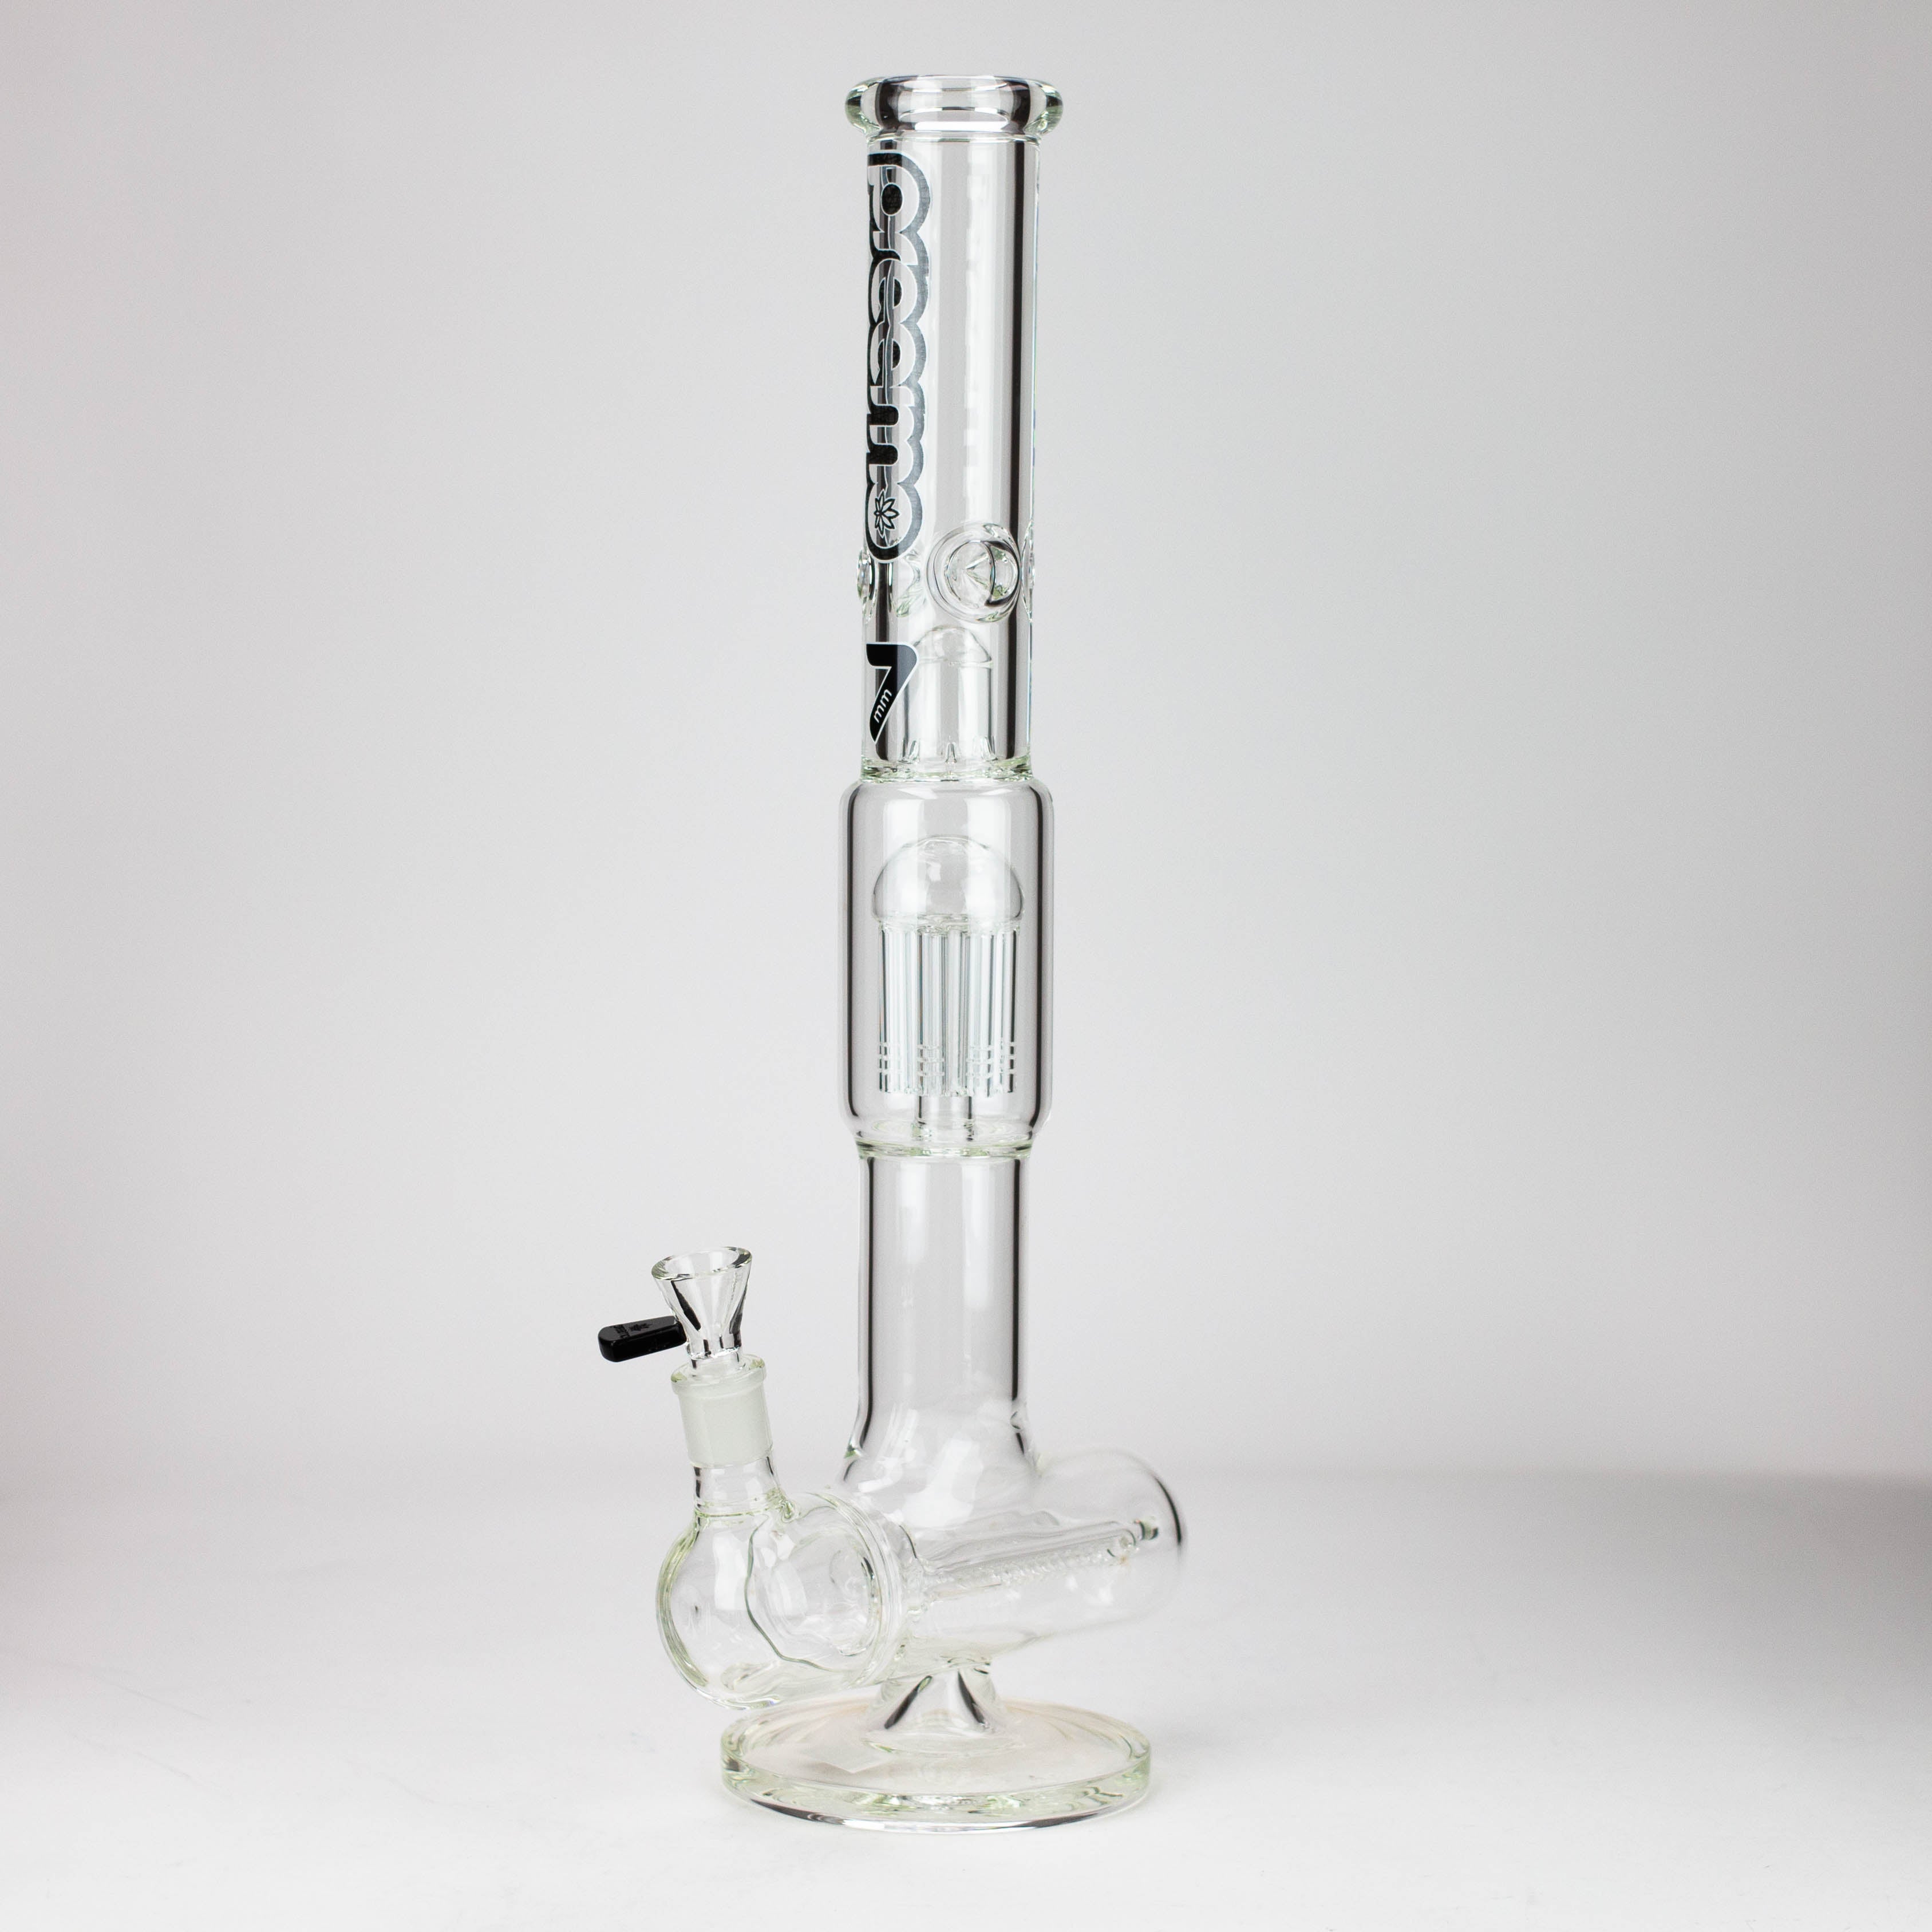 preemo - 20 inch Dome Over Triple Inline to Tree Perc_8